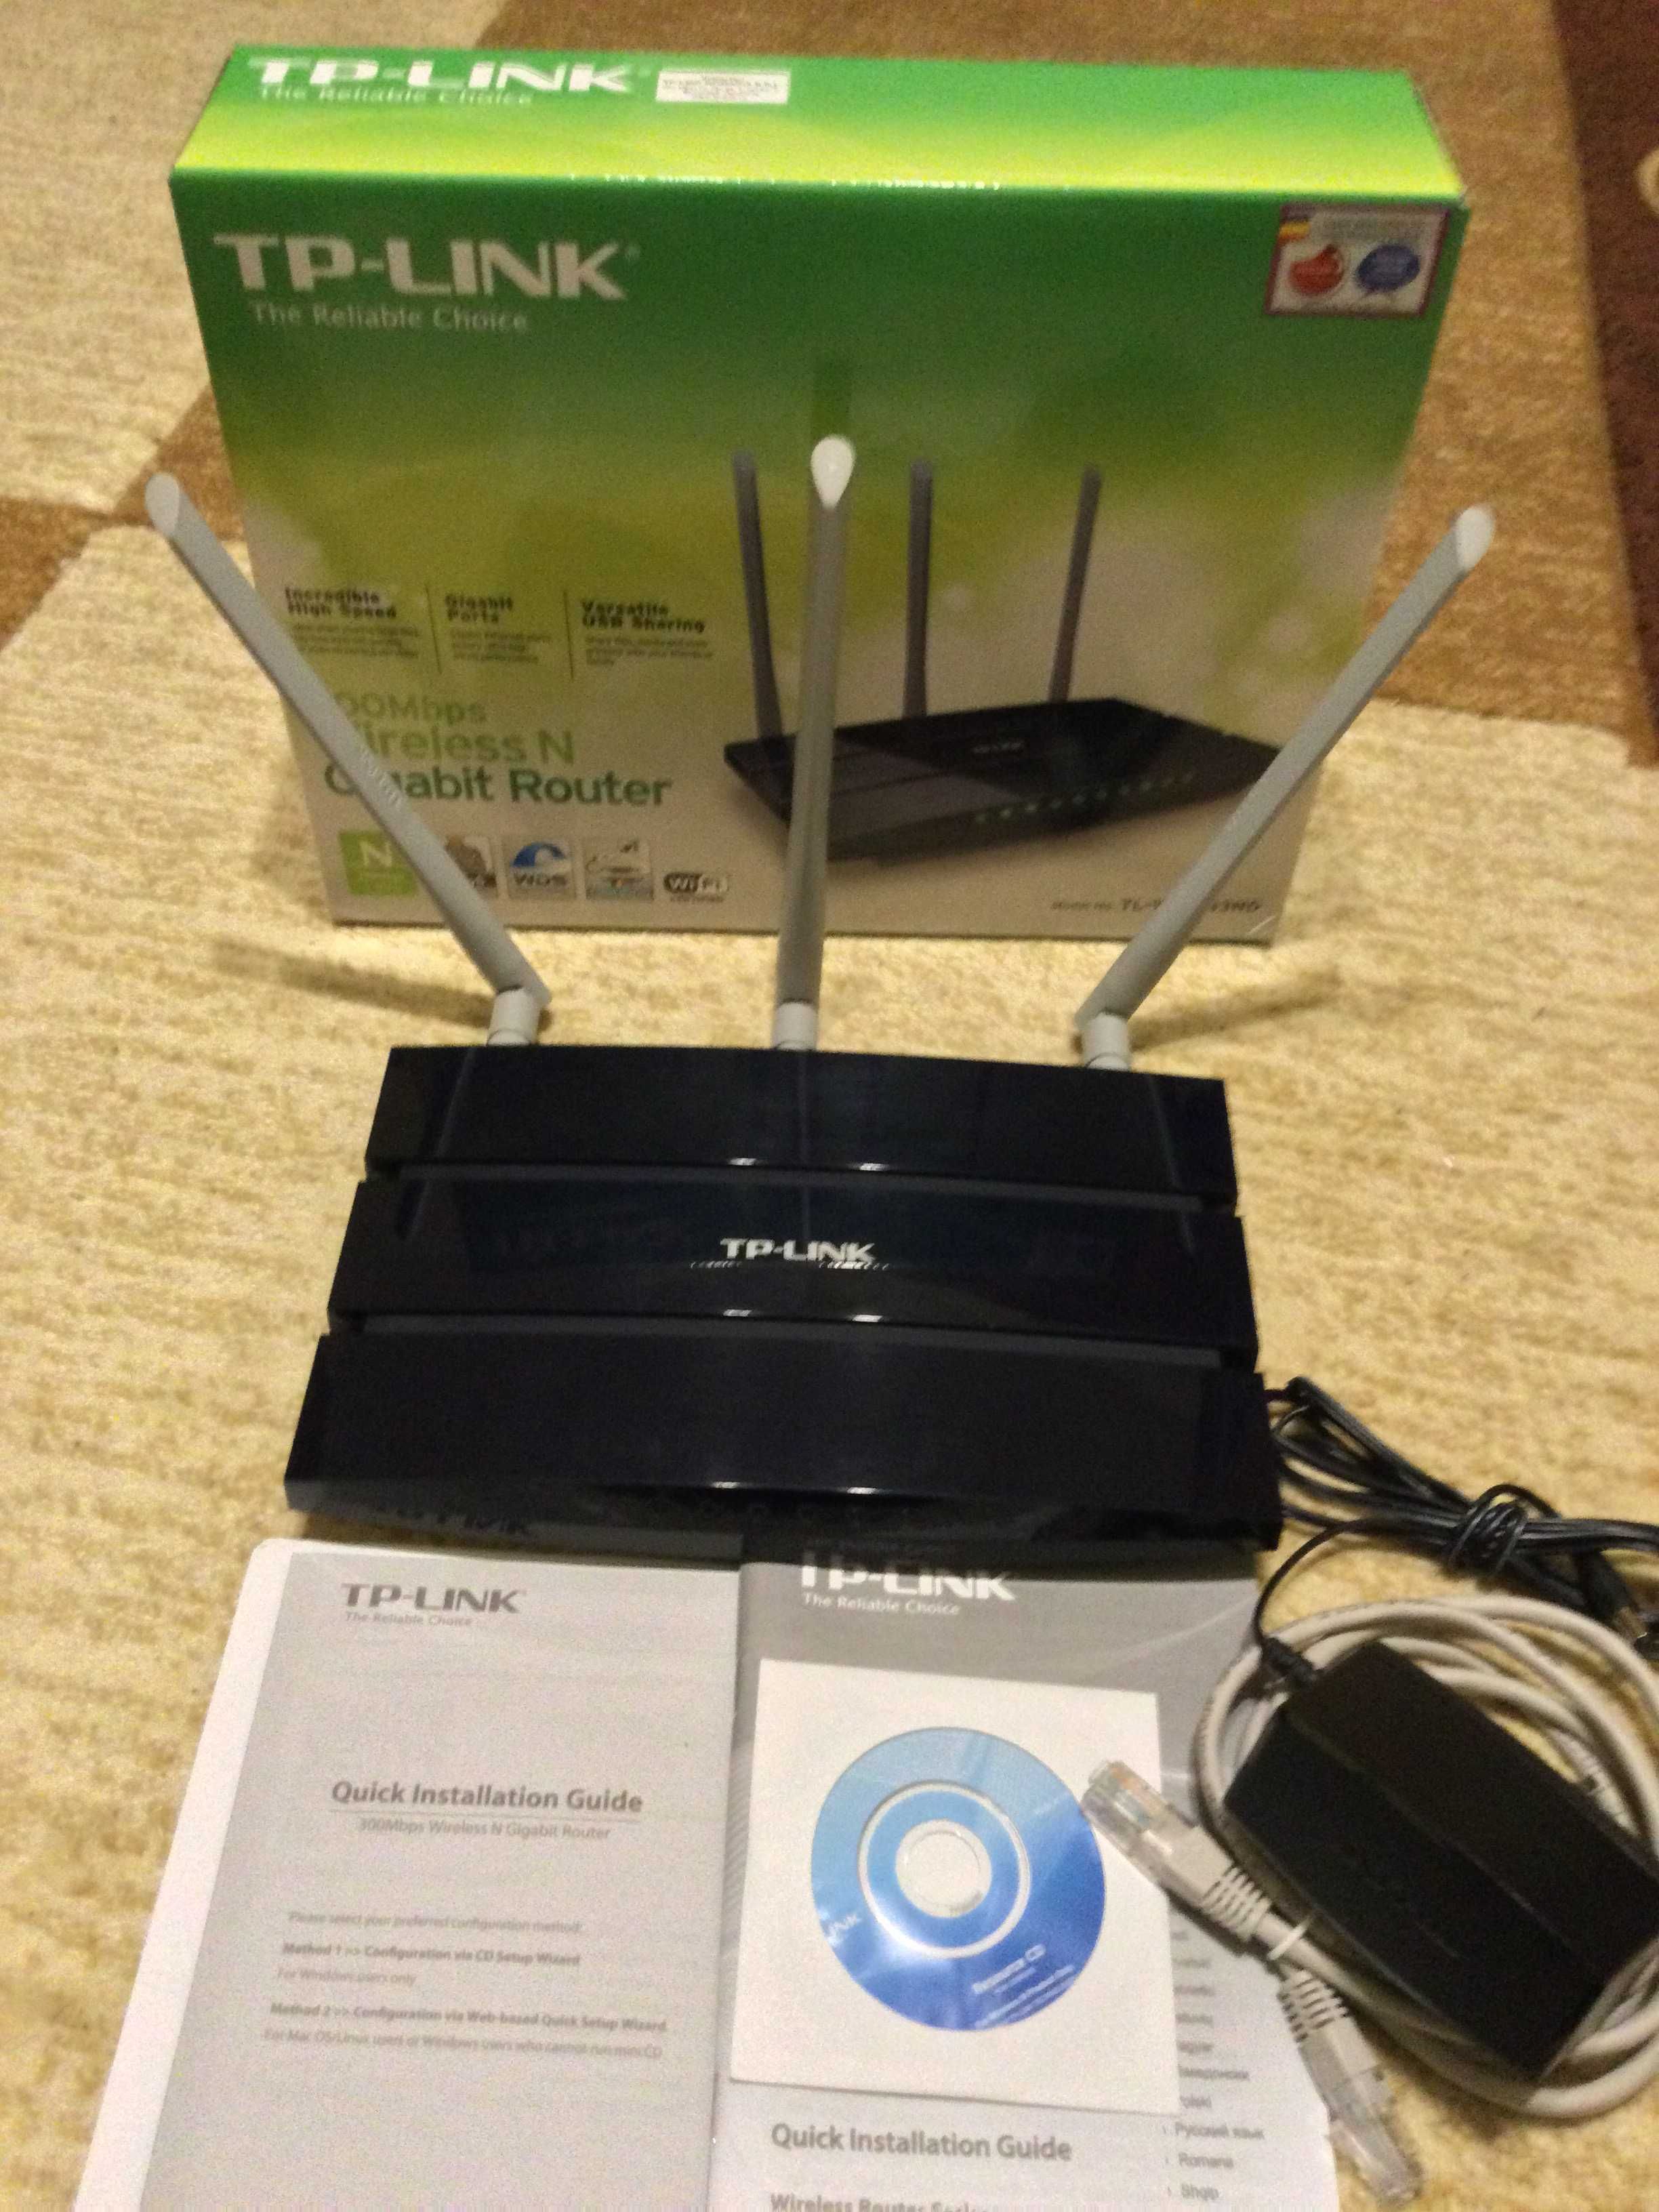 Router wireless Gigabit TP-Link TL-WR1043ND, USB, full box, impecabil.